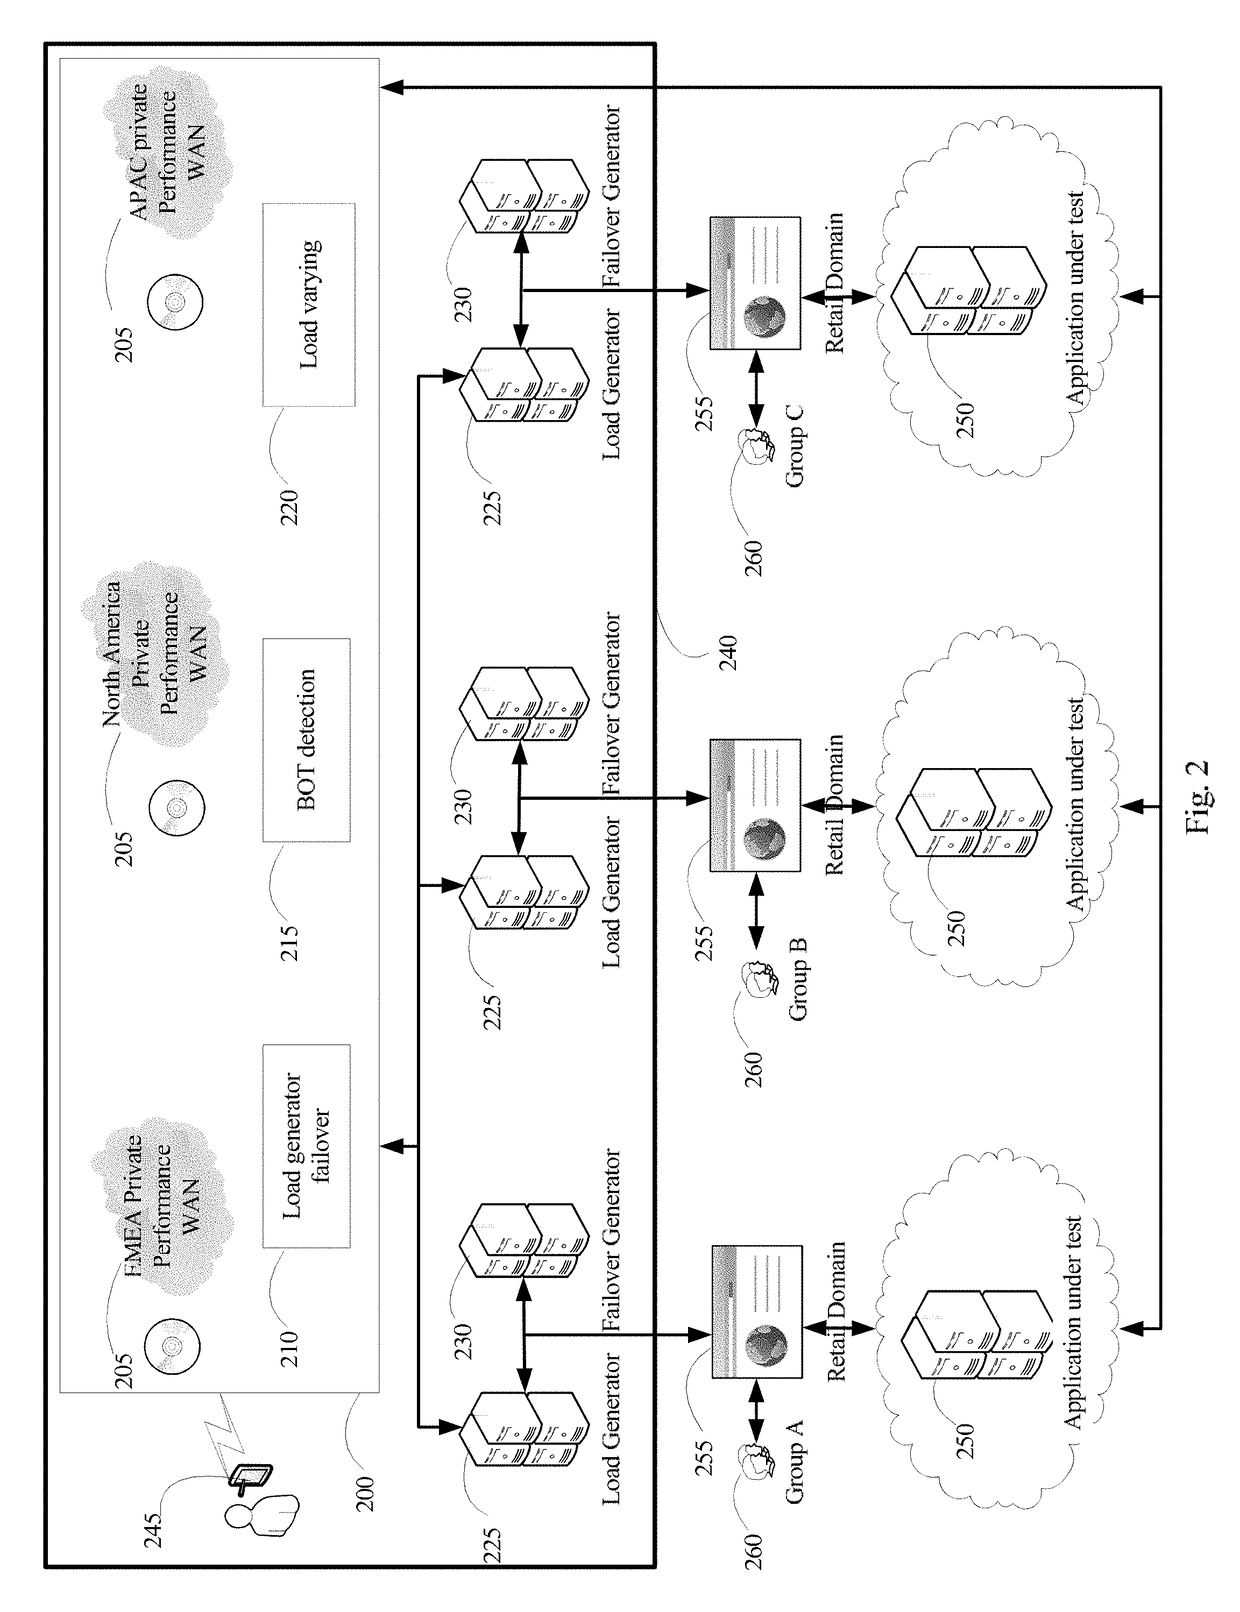 Method and program product for a private performance network with geographical load simulation